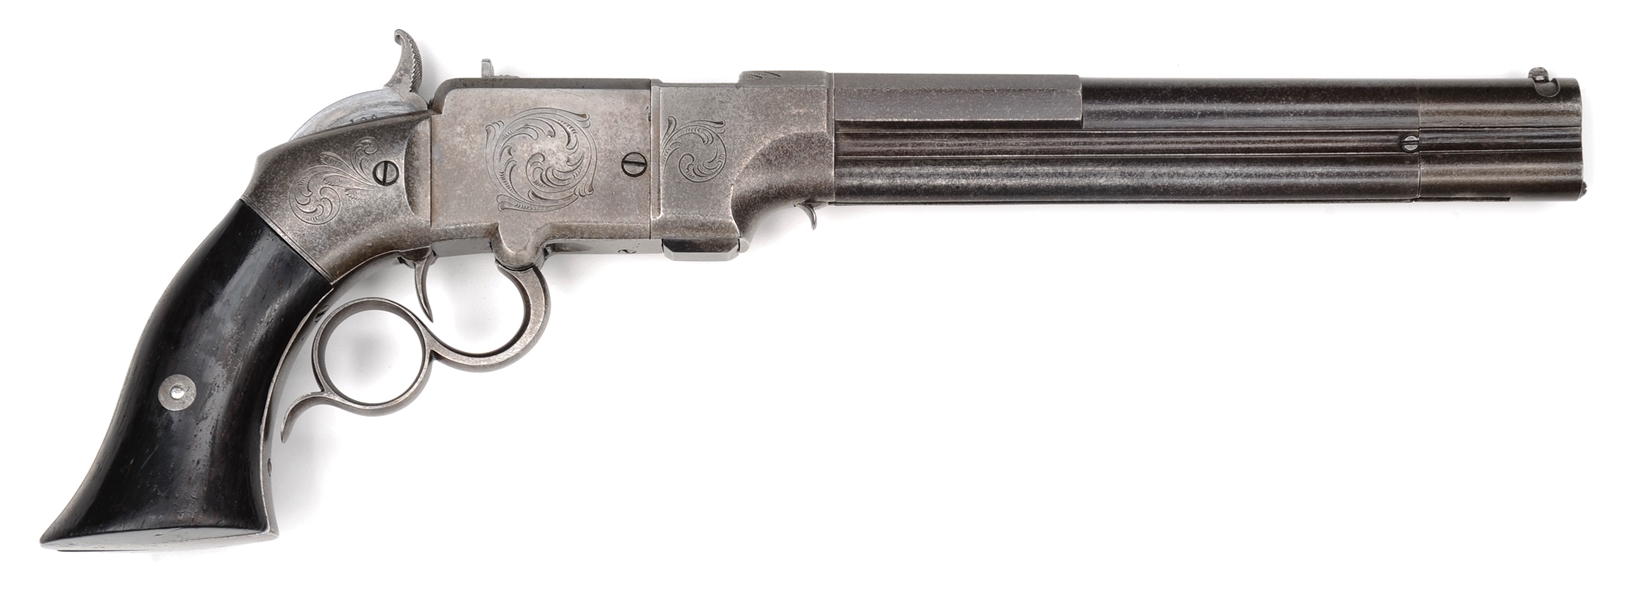 SMITH & WESSON NO 2 VOLCANIC .41 SN 129                                                                                                                                                                 